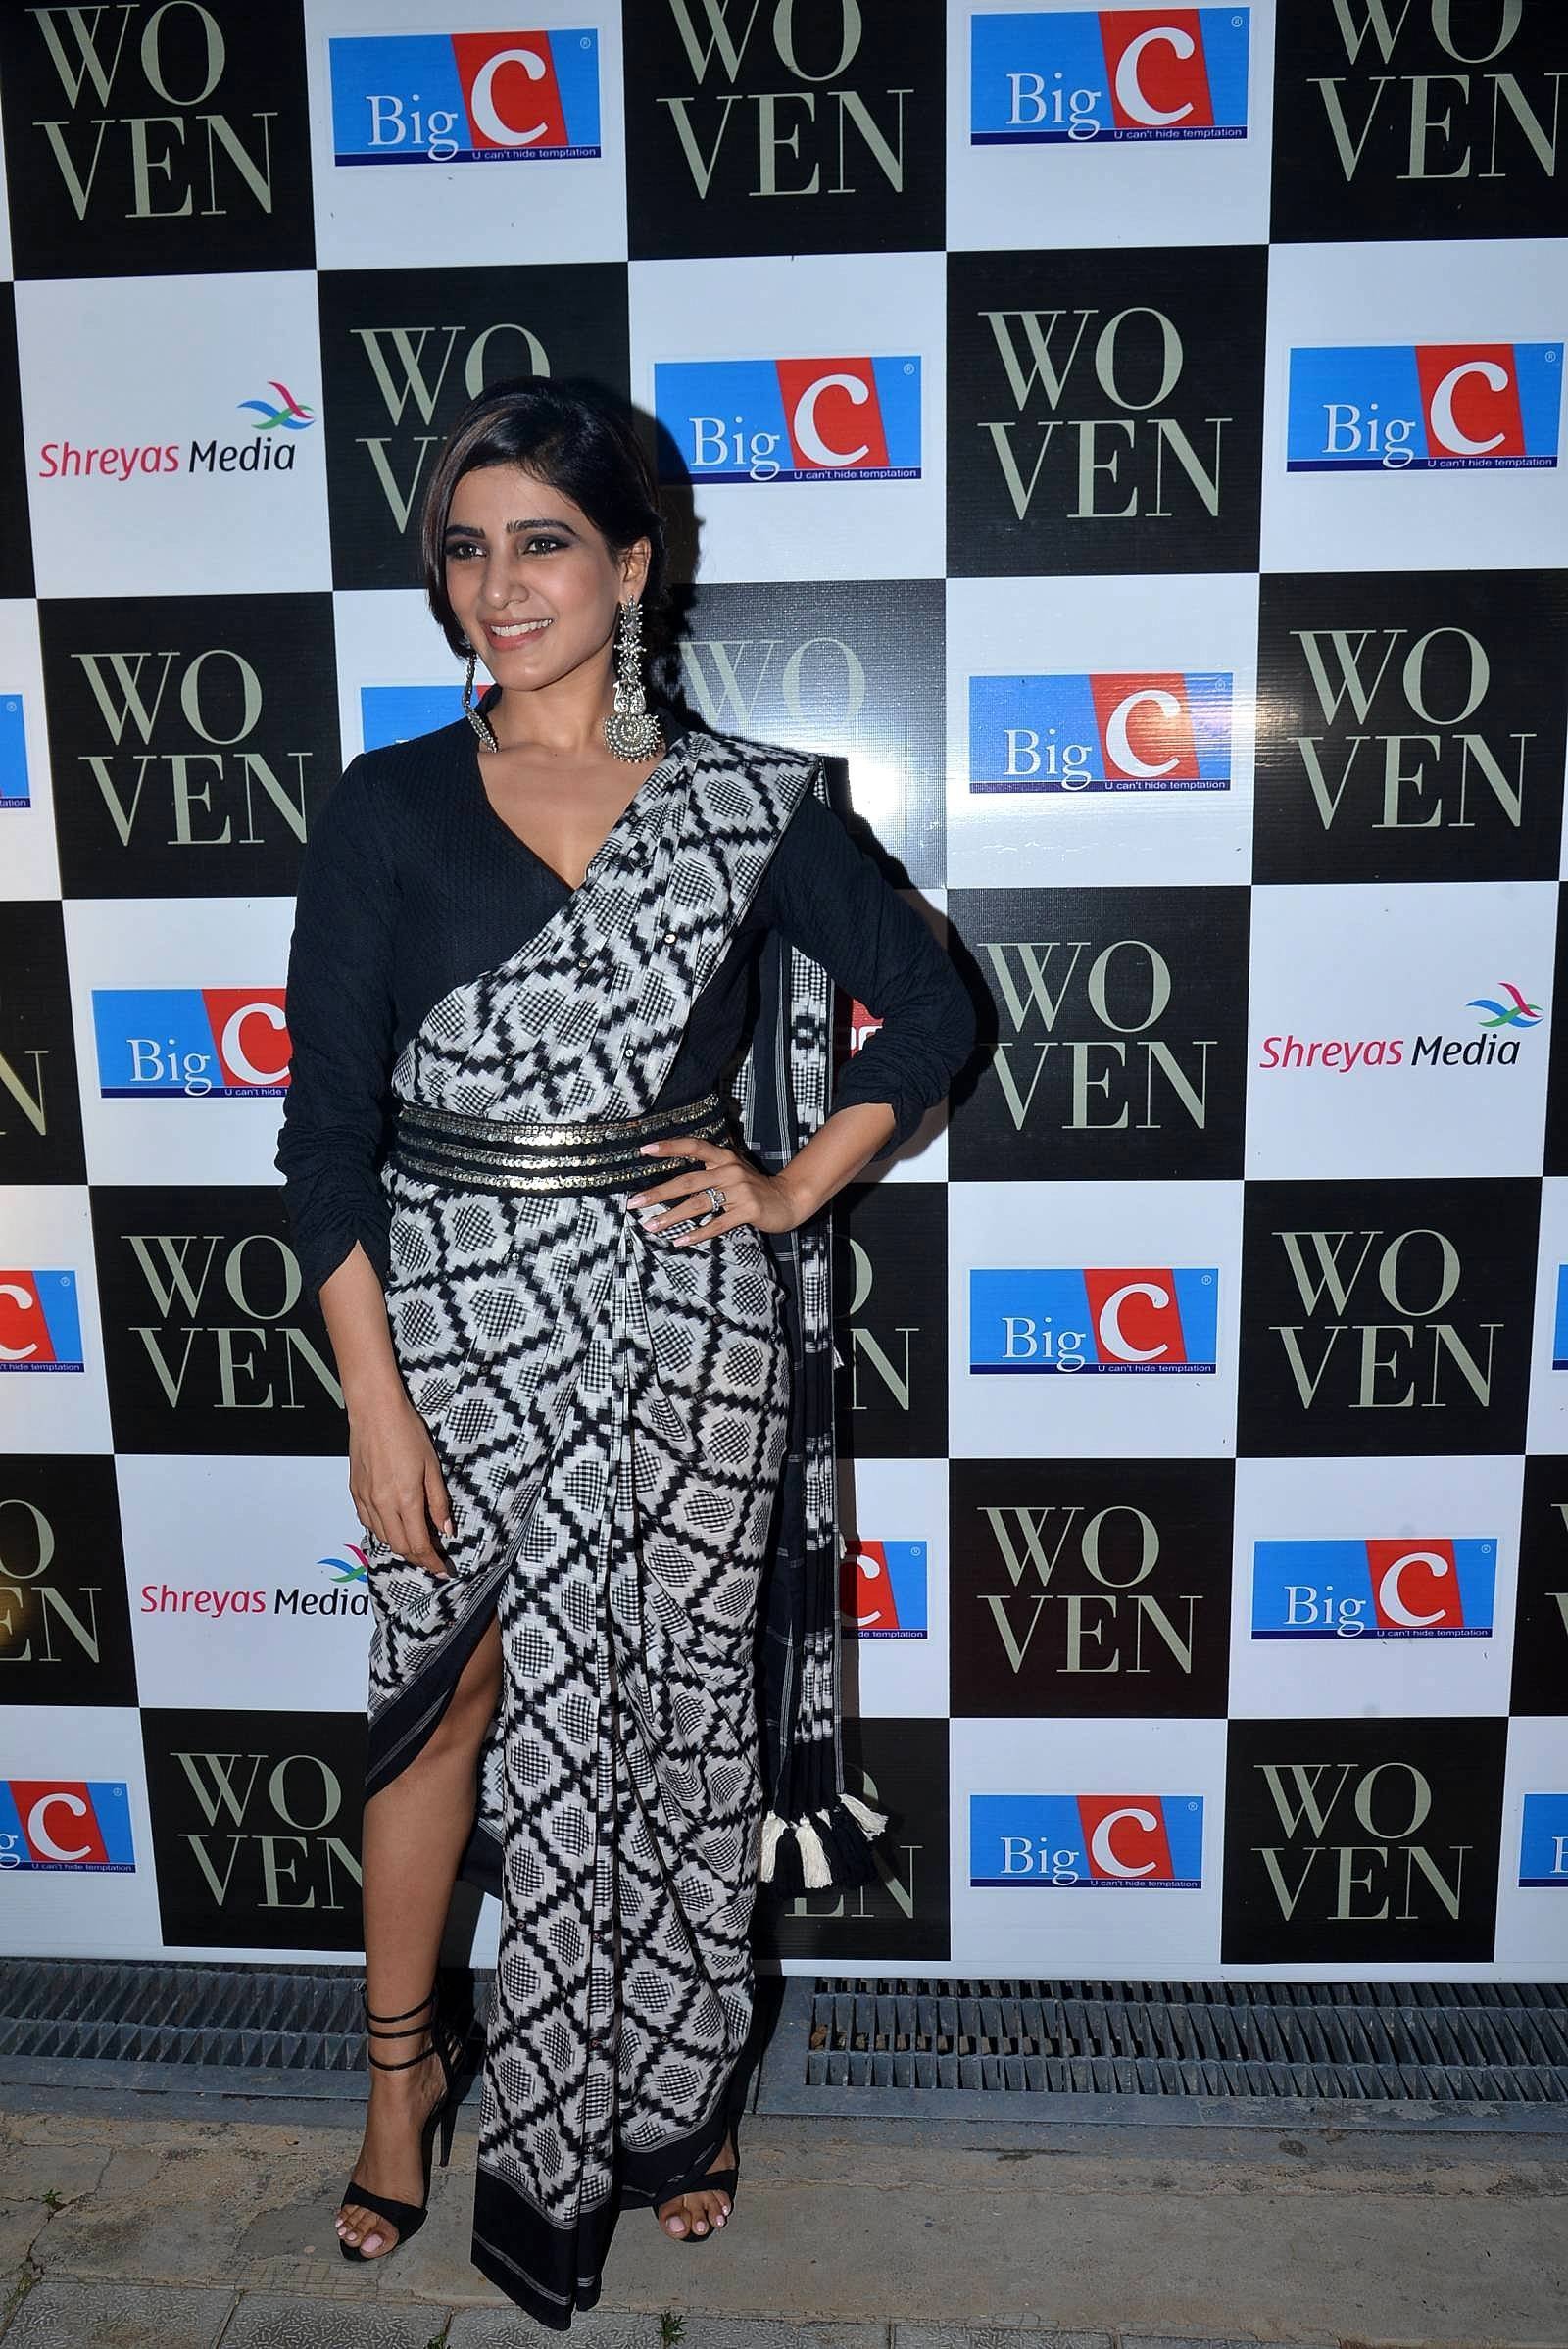 Samantha Ruth Prabhu - Celebrities at Woven 2017 Fashion Show Photos | Picture 1521524